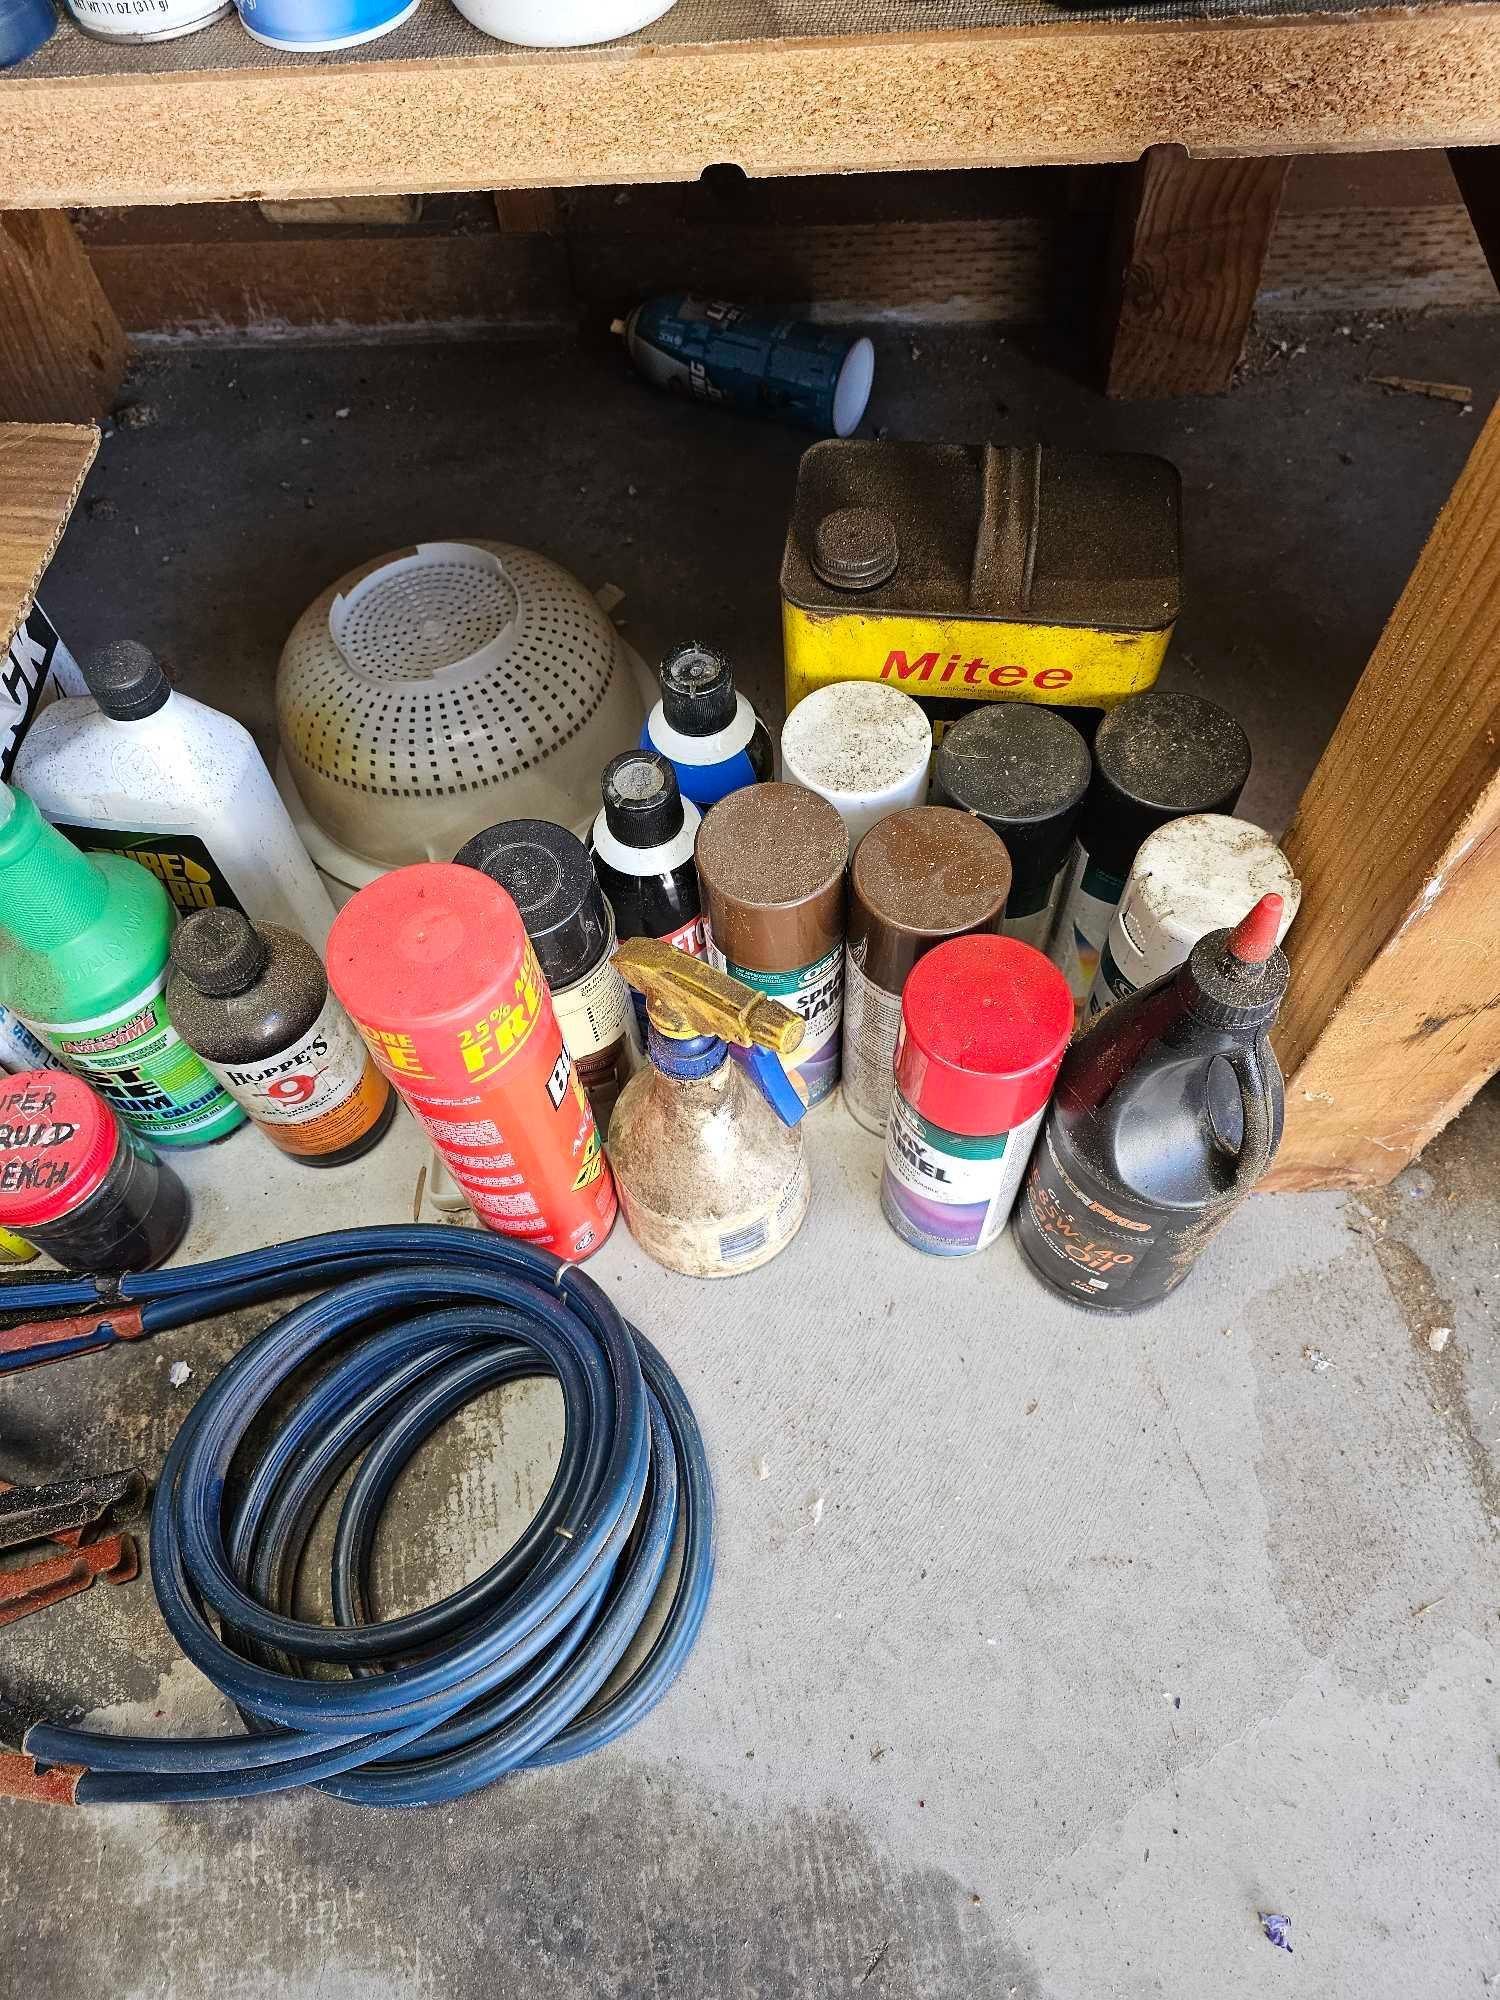 MIXED LOT OF HOUSEHOLD CHEMICALS